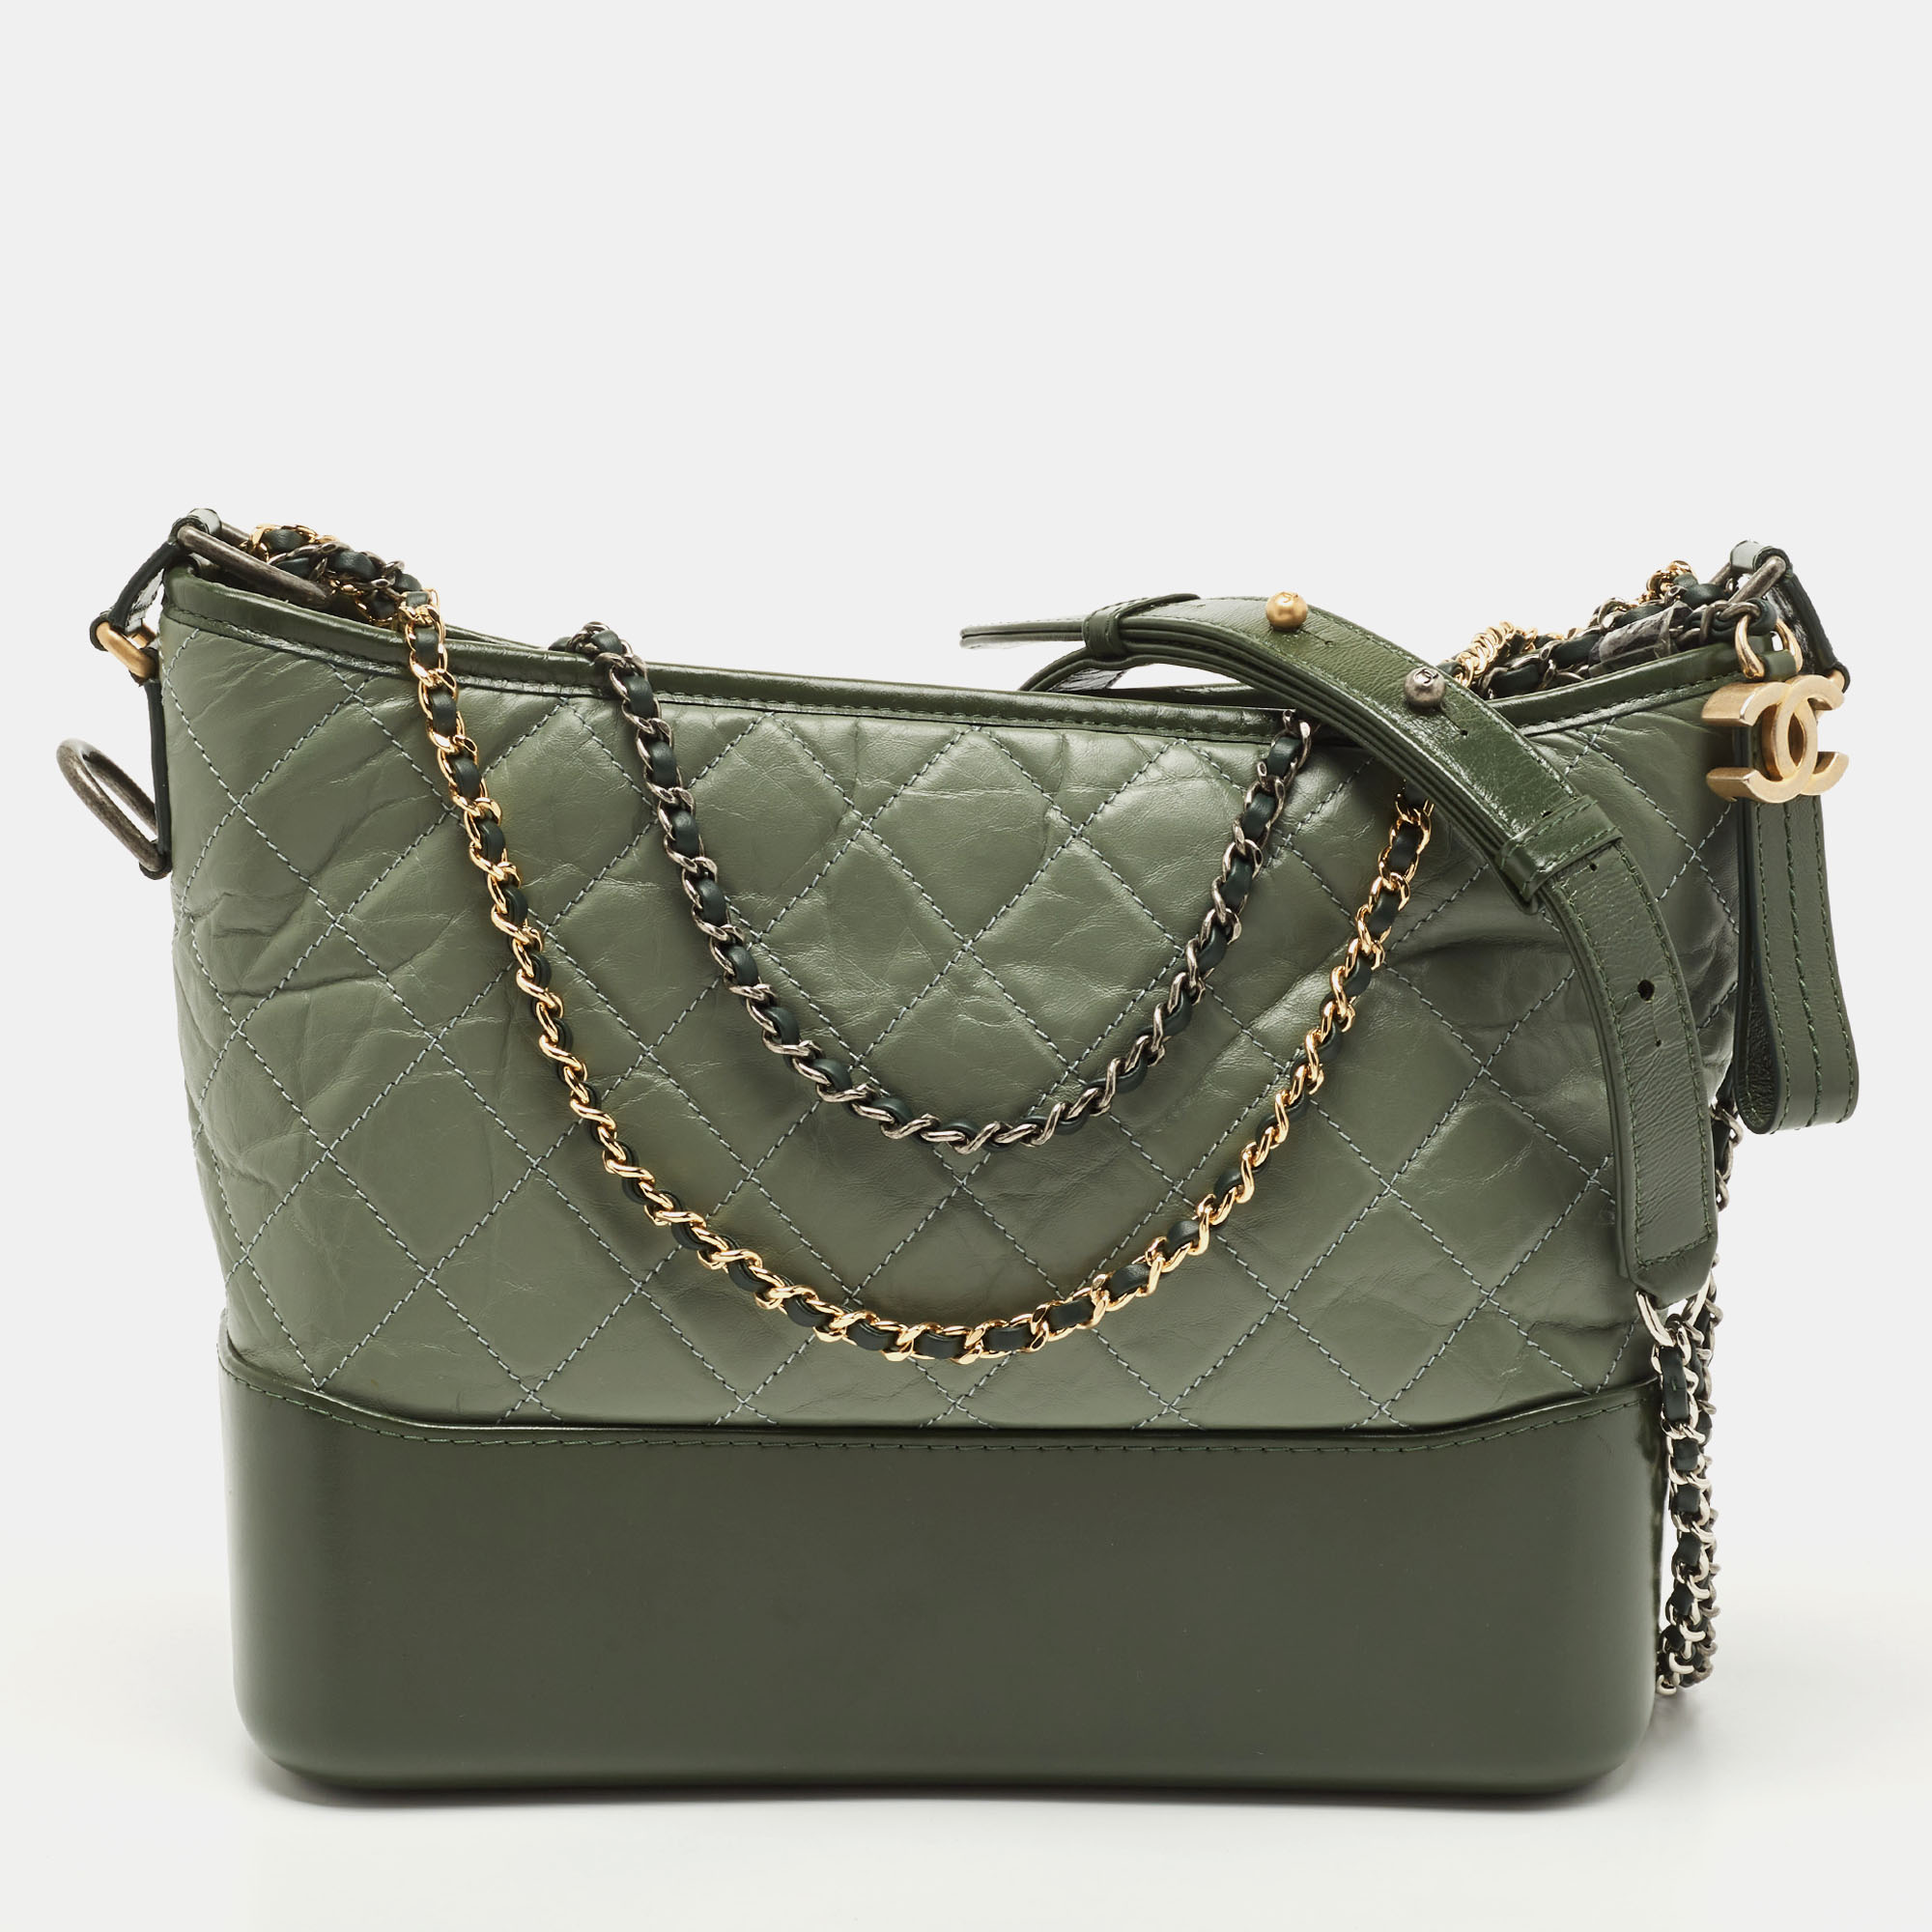 Chanel Two Tone Green Quilted Aged Leather Medium Gabrielle Hobo